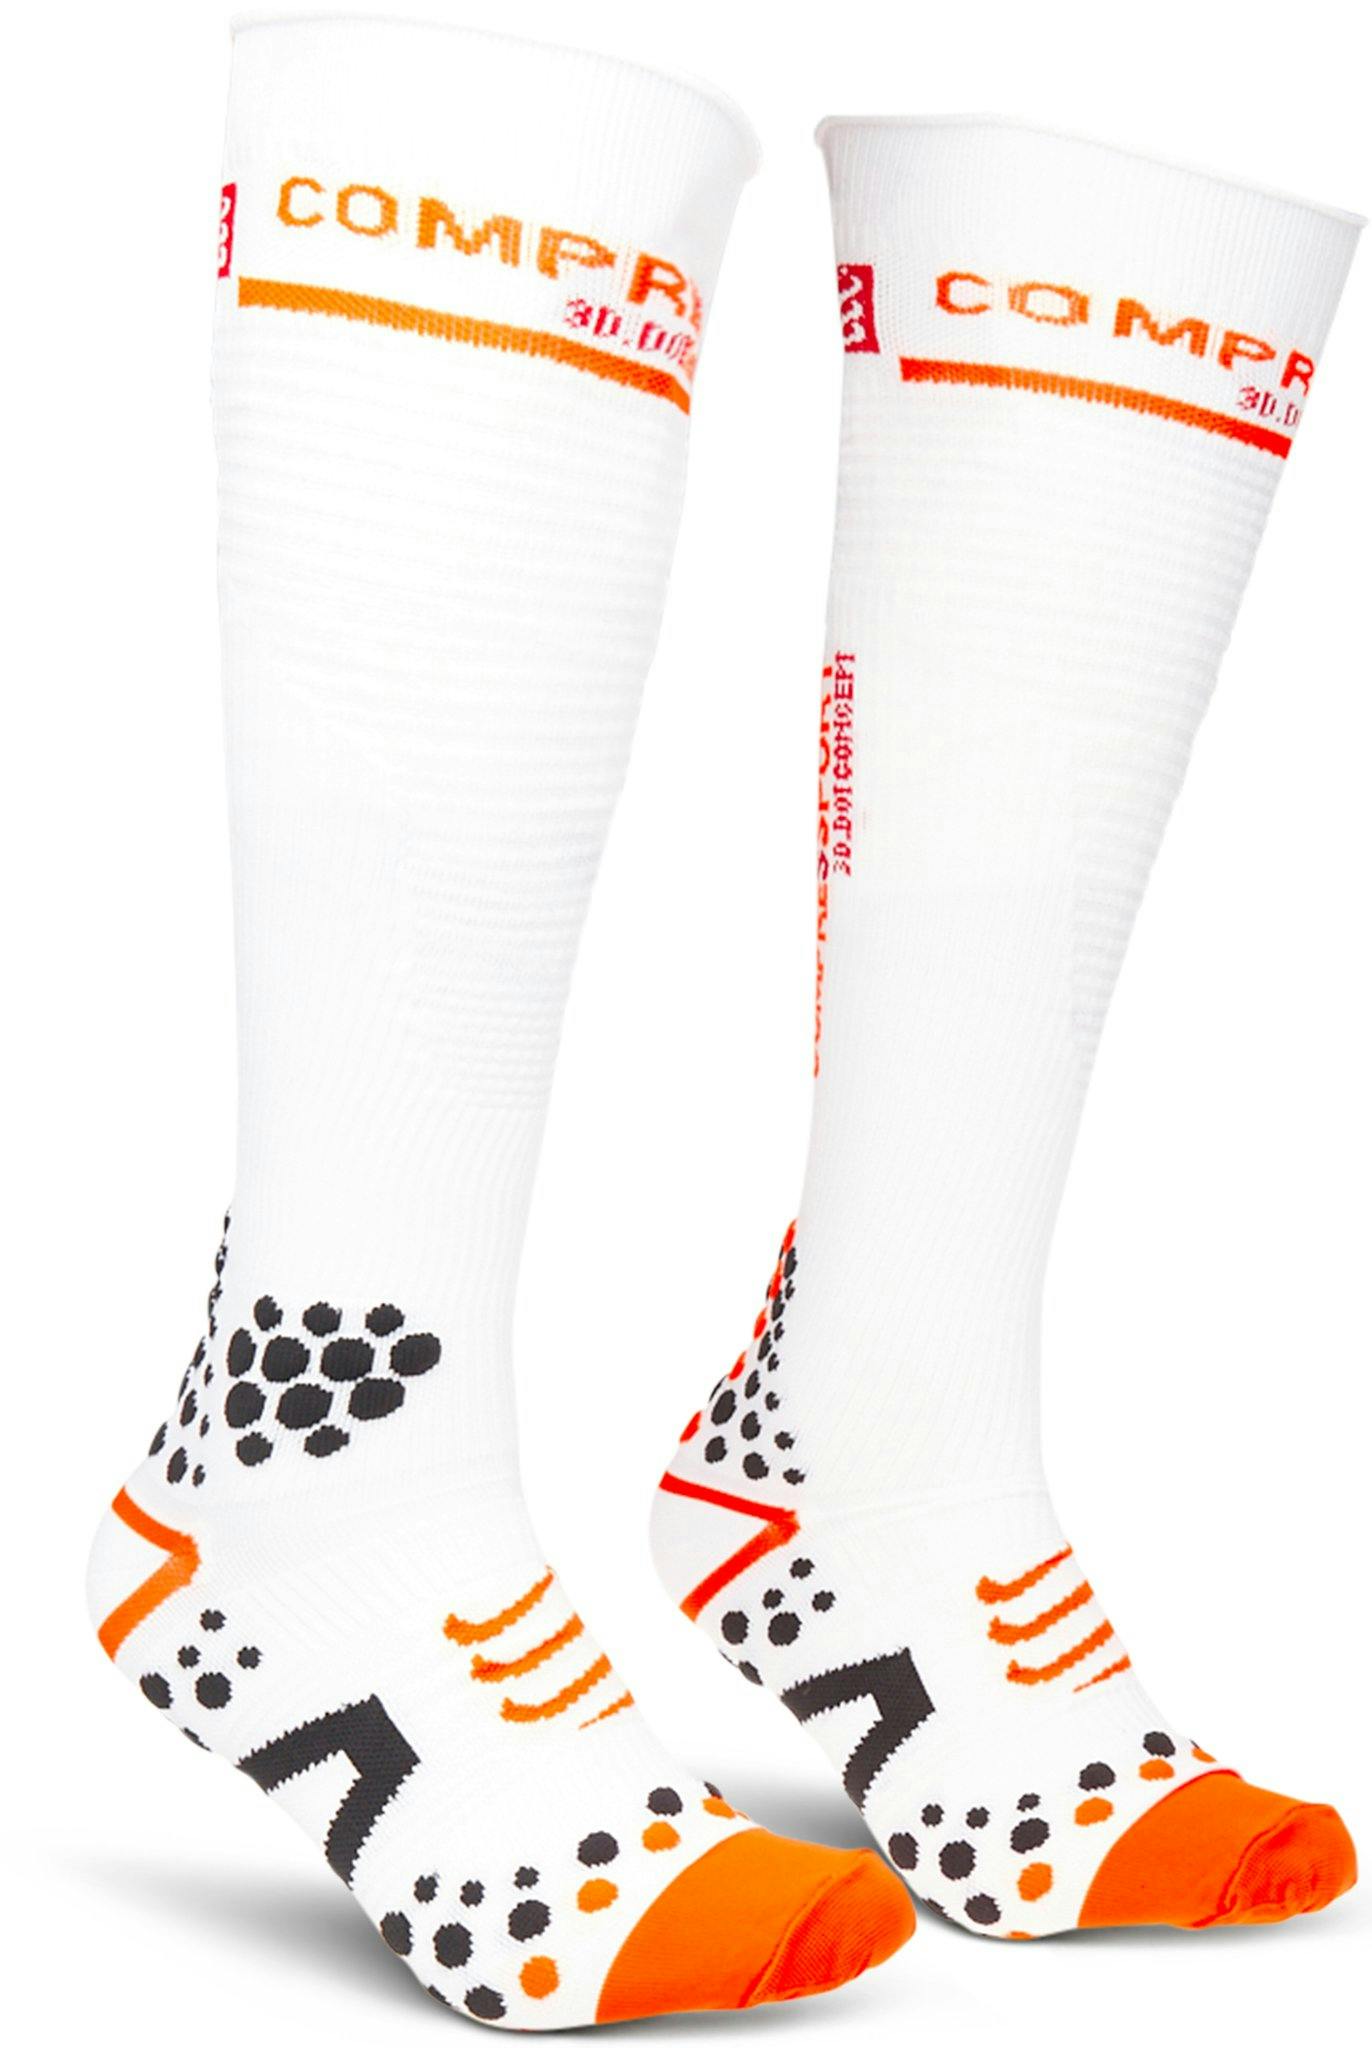 Product image for Full Compression socks - Unisex